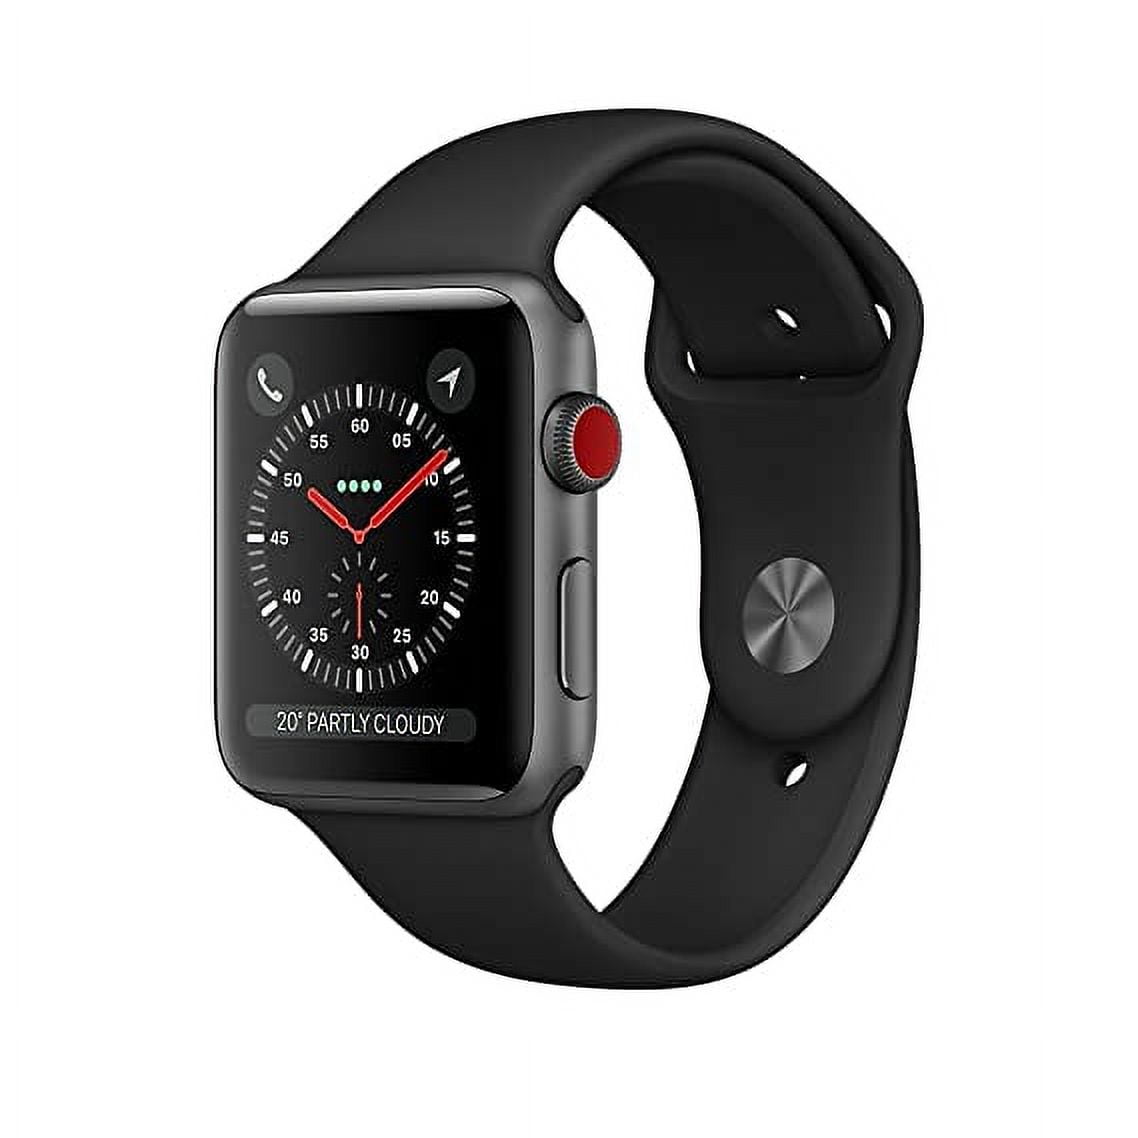 Apple Watch Series 3 - GPS + Cellular, 42mm - Space Gray Aluminum Case with  Black Sport Band (Scratch and Dent)